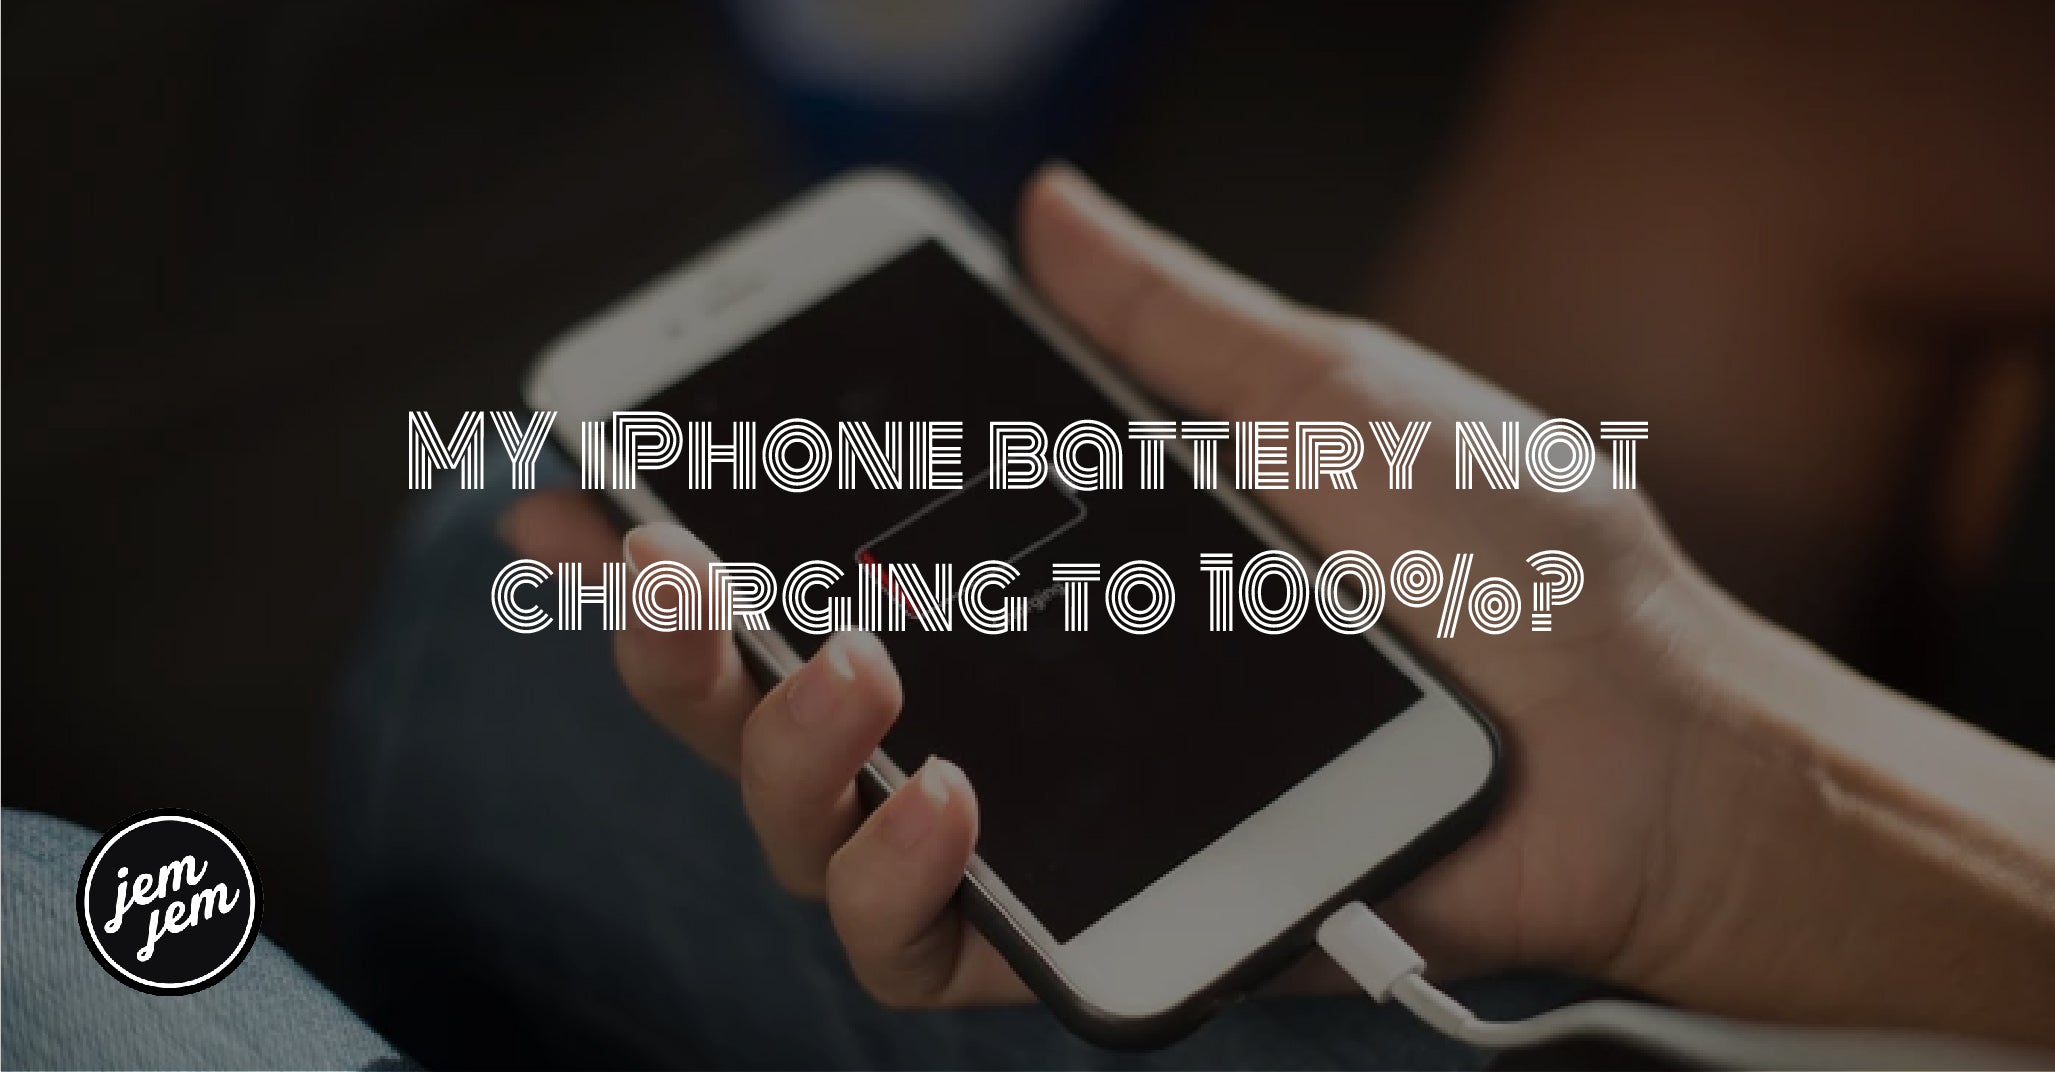 MY iPhone battery not charging to 100%? Here's Why (& How to Fix It)